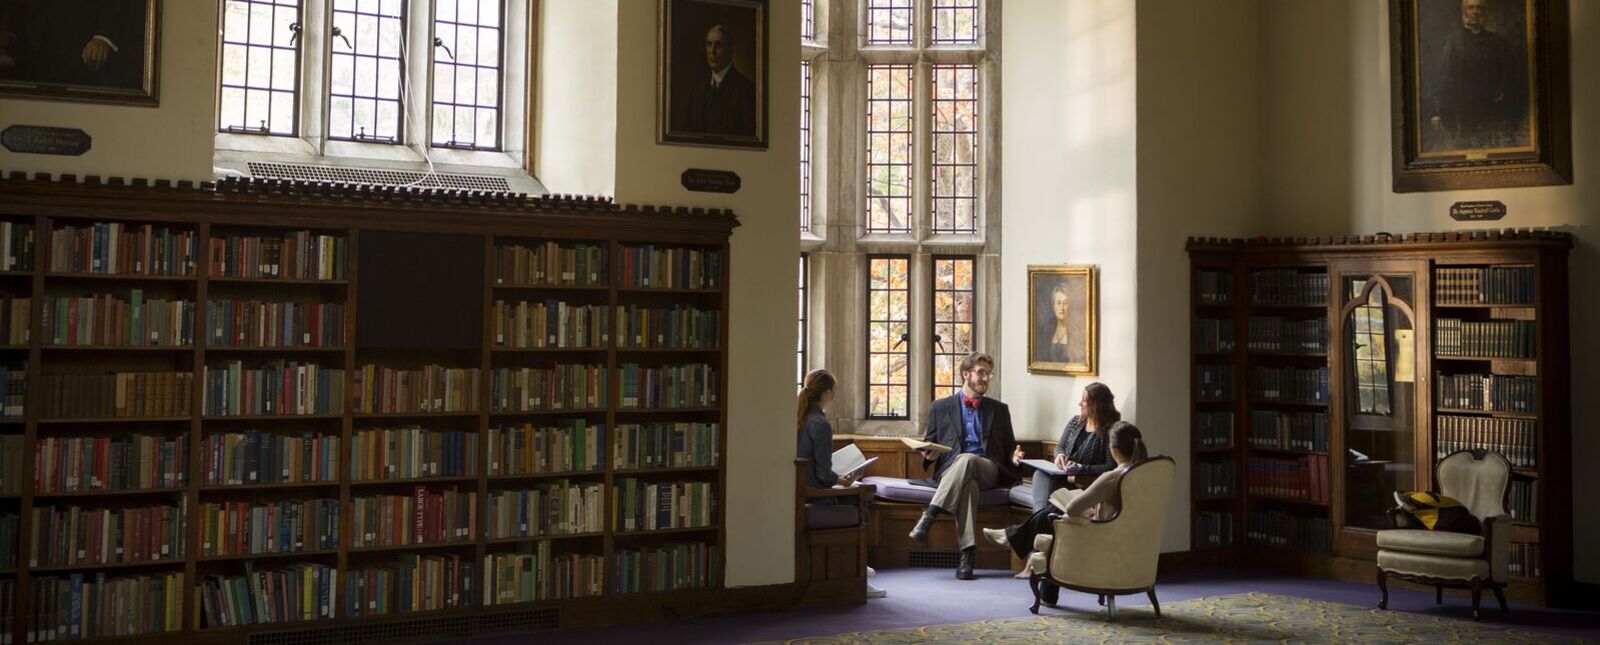 Students sit in and around a window bay between bookcases in Hamilton Hall